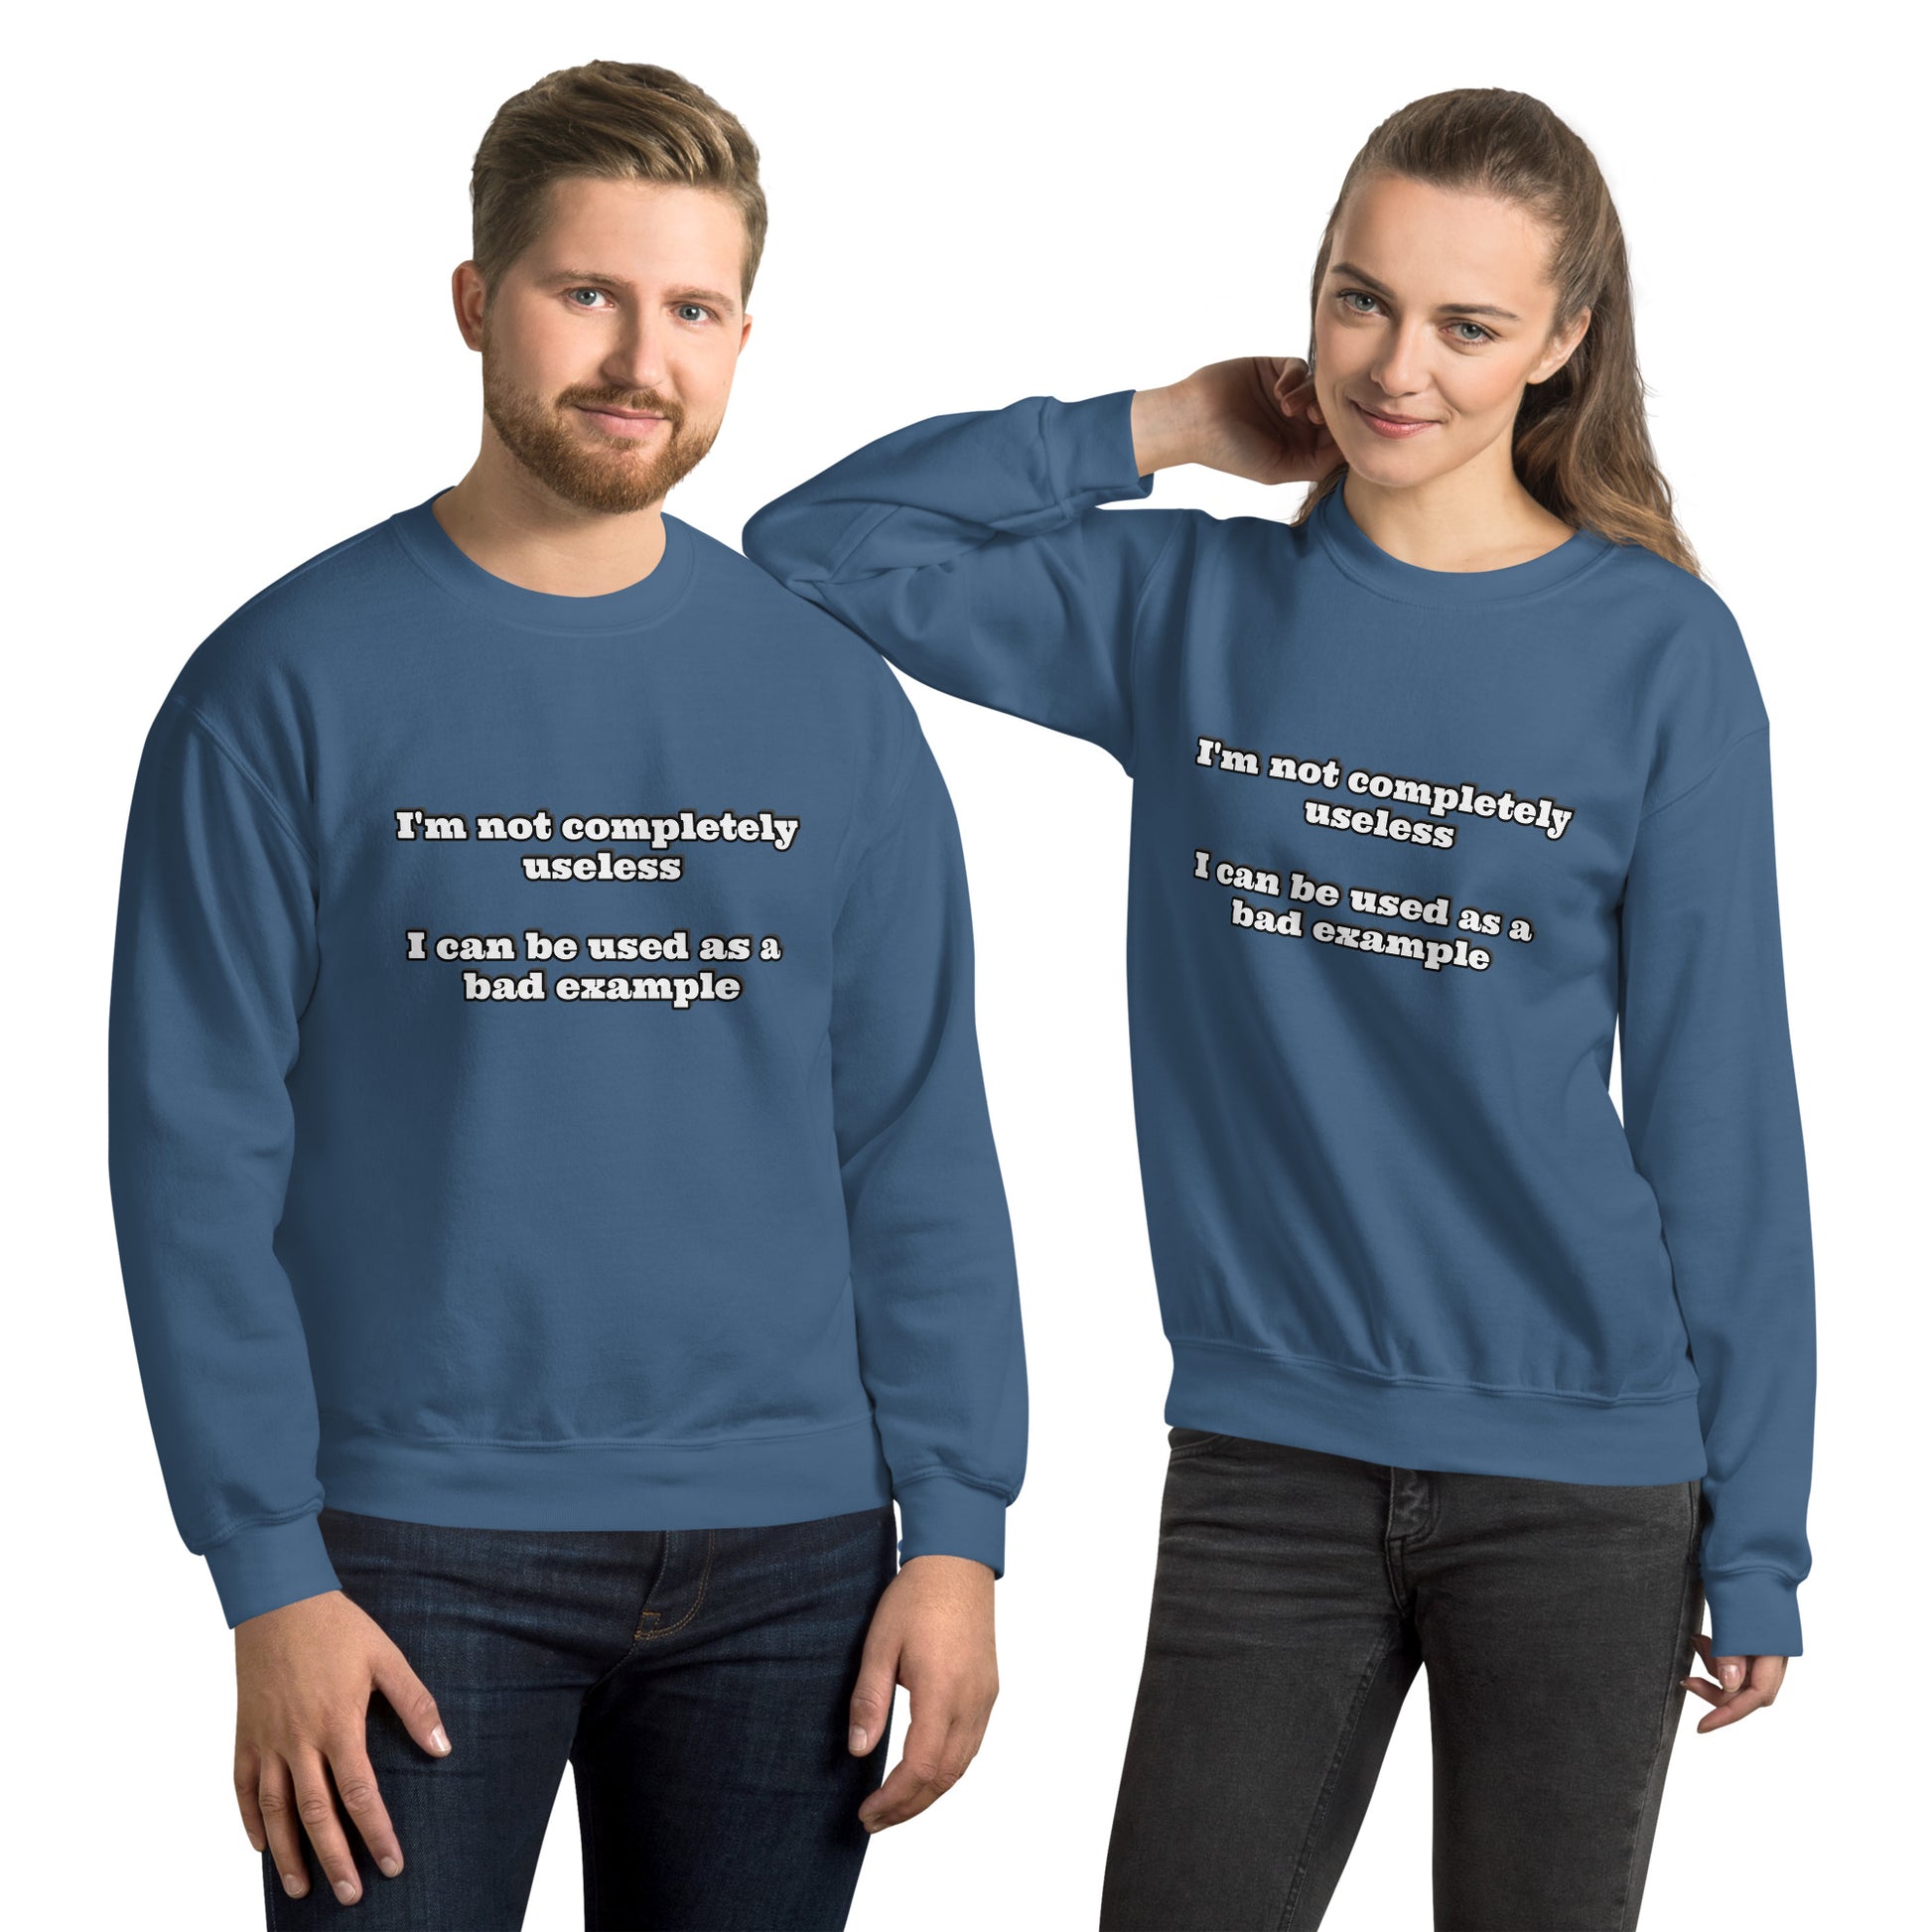 Man and women with indigo blue sweatshirt with text “I'm not completely useless I can be used as a bad example”